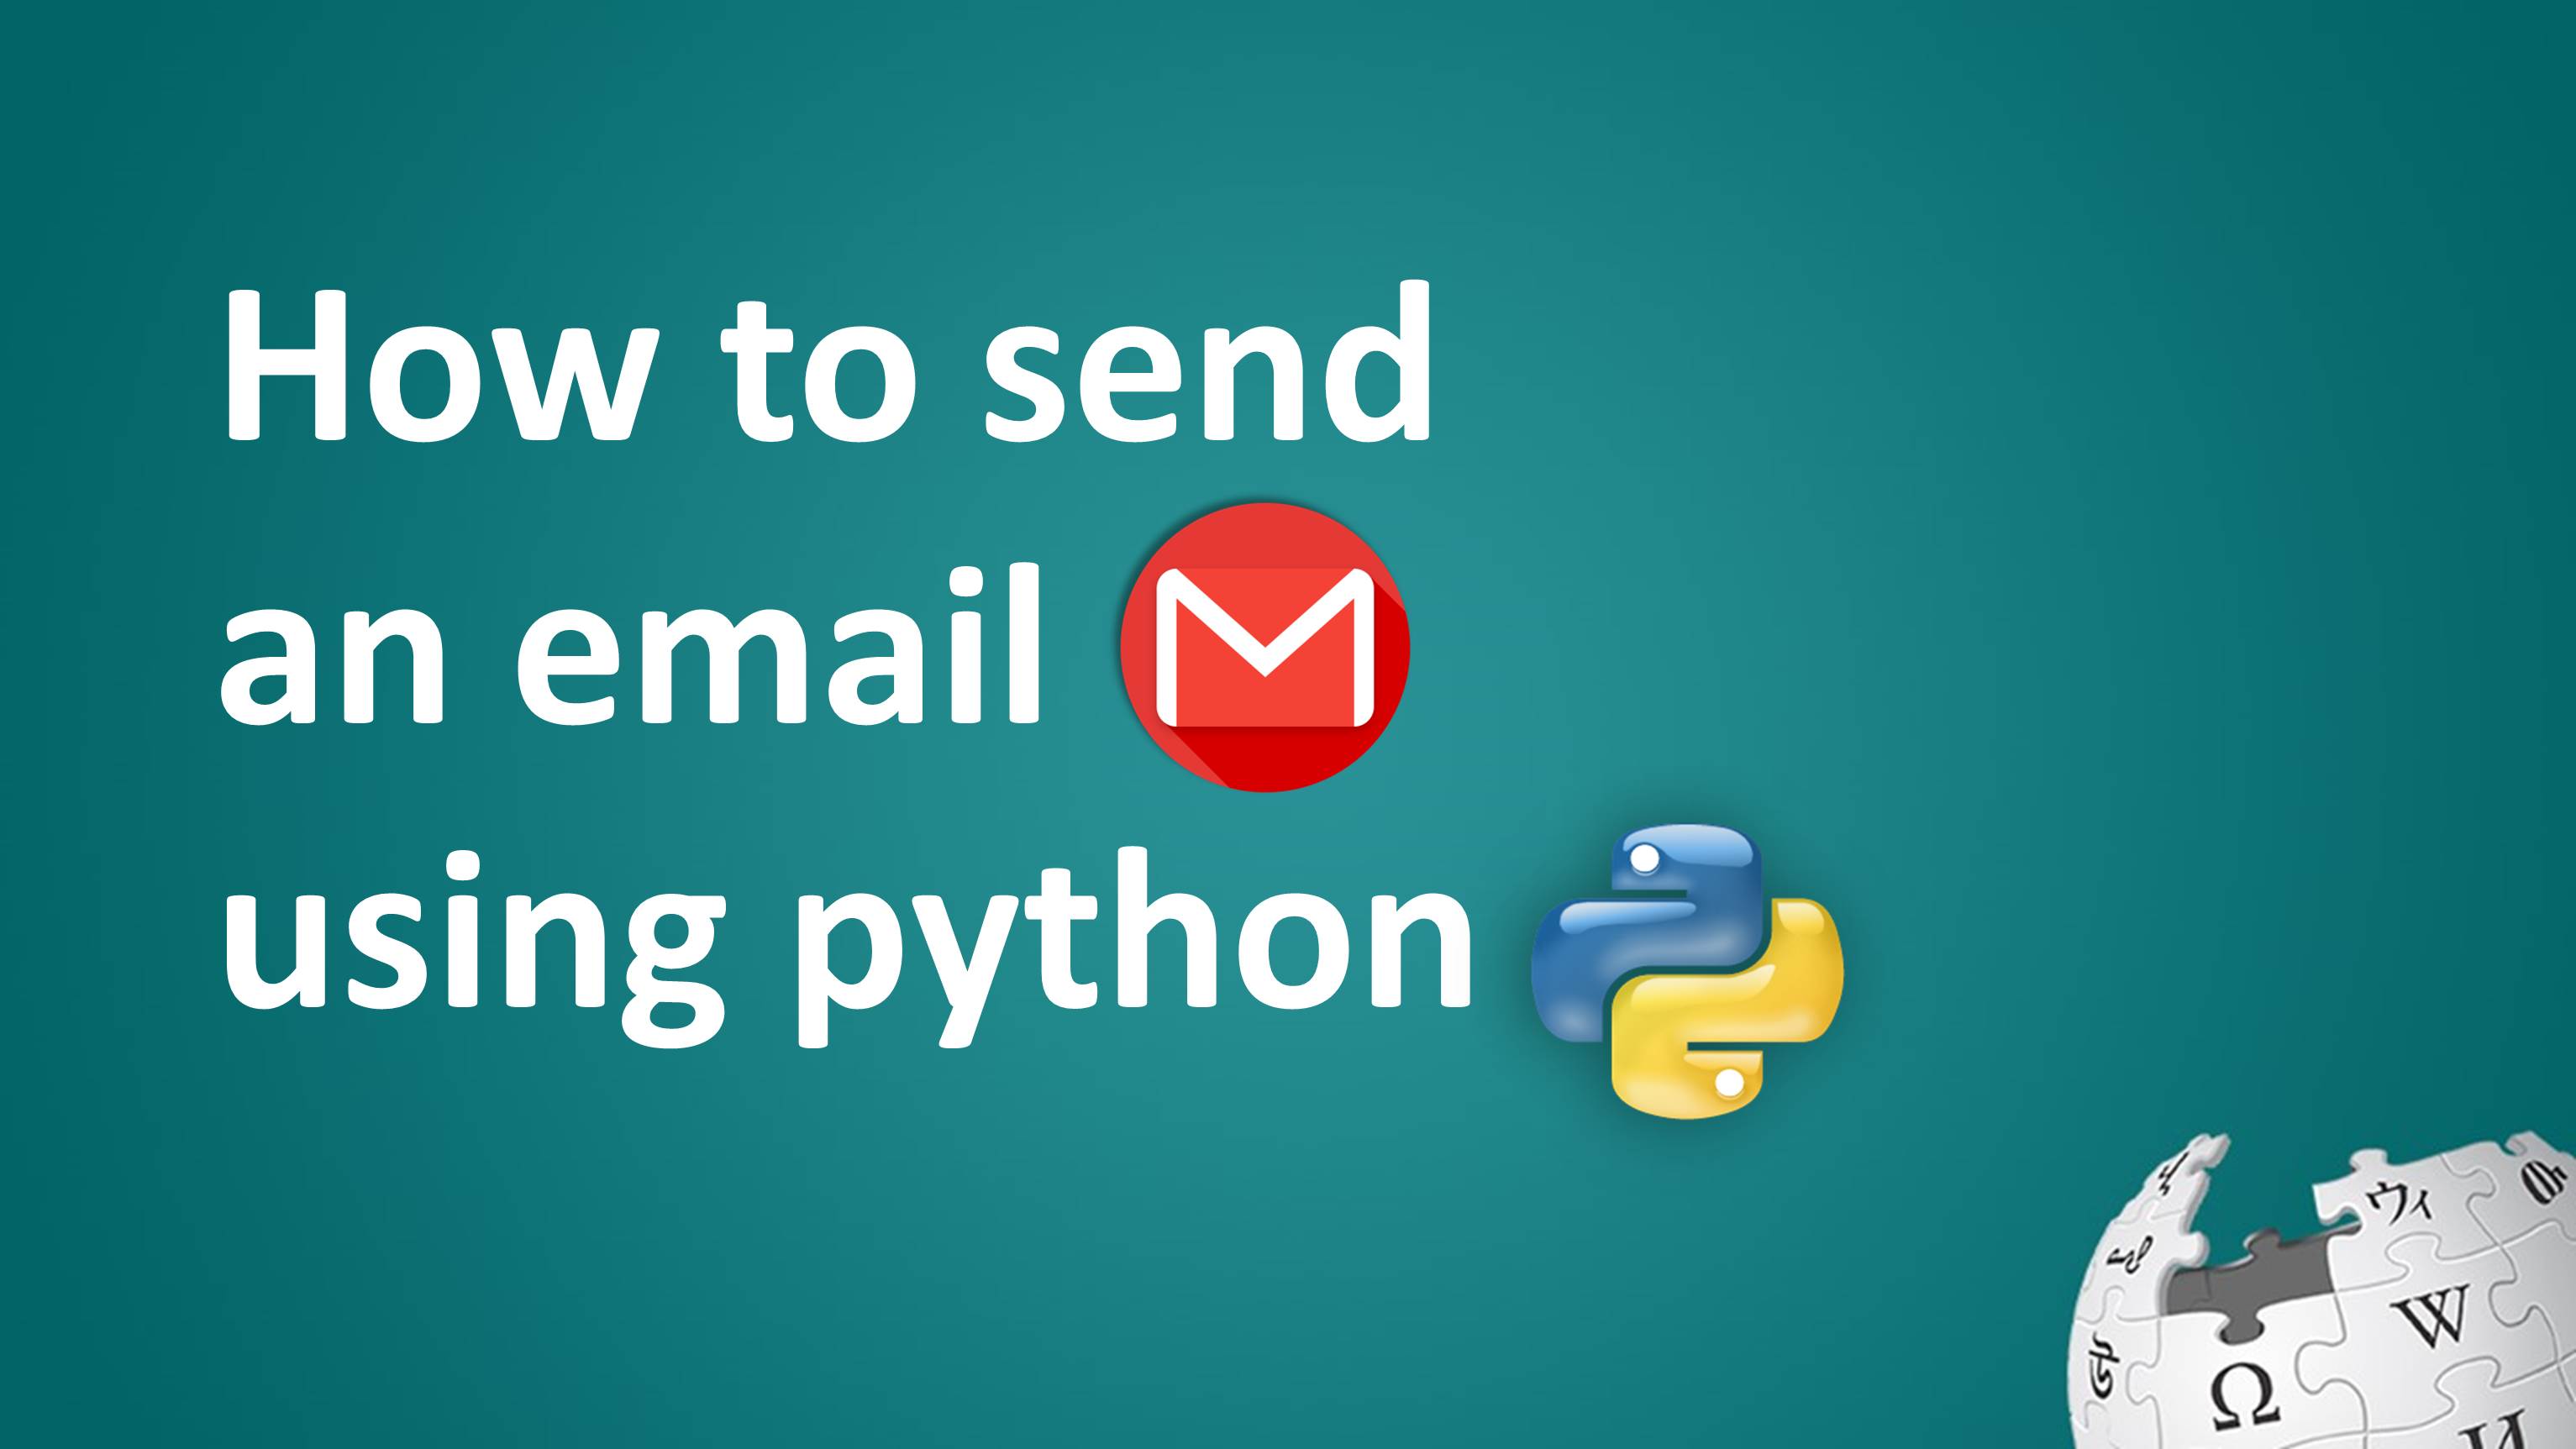 How to send an email using python